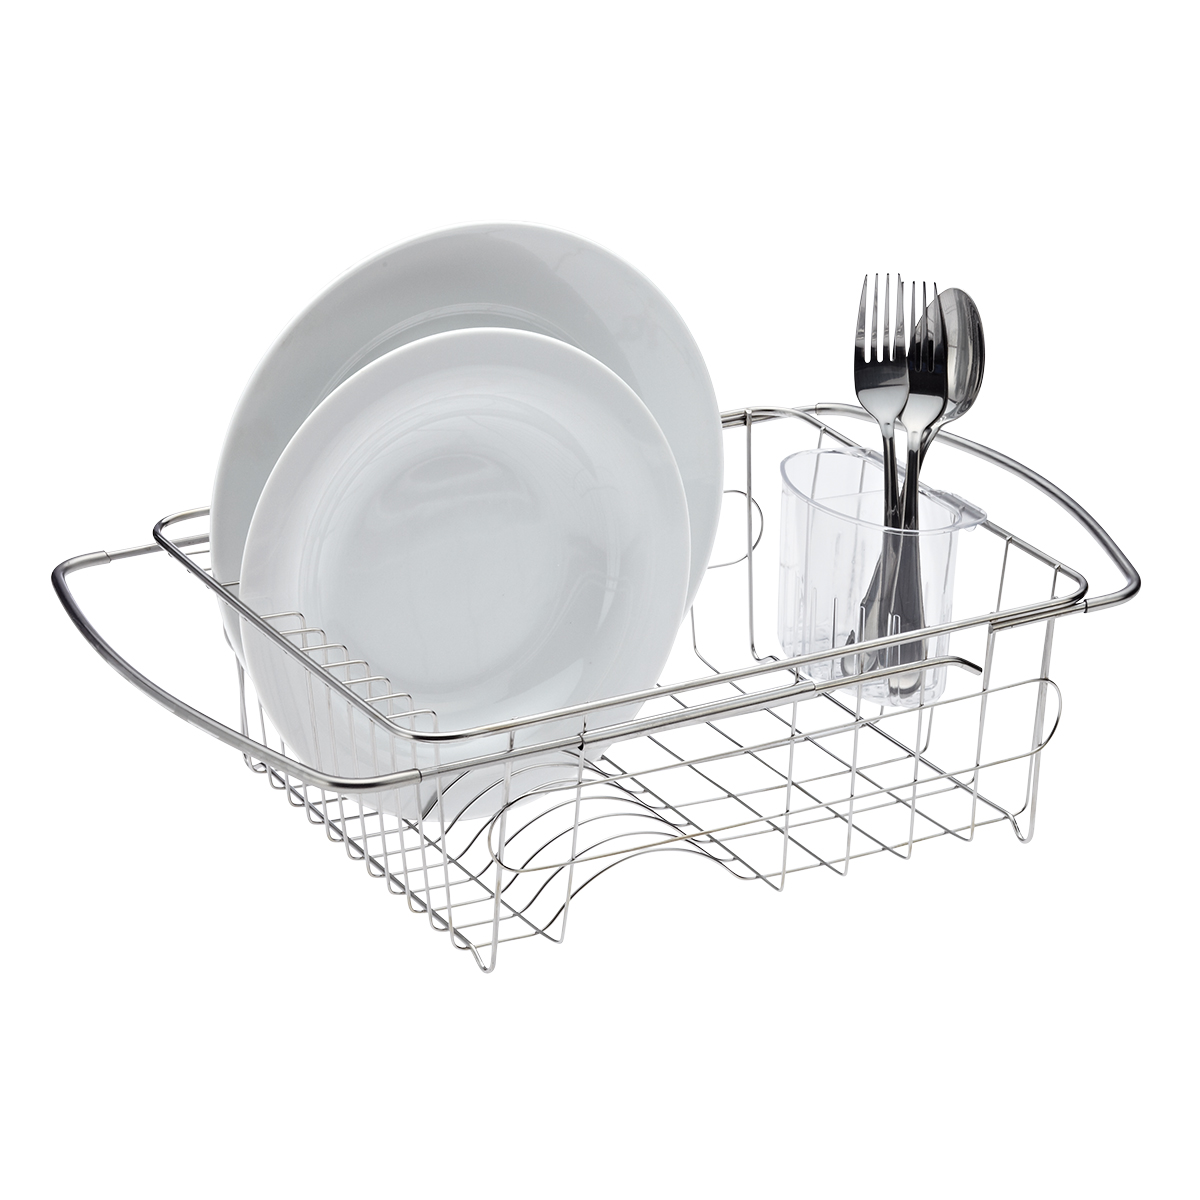 Details about   Stainless Steel Over Sink Rack Drain Drainer Drying Rack Dish Rack Cutlery New 